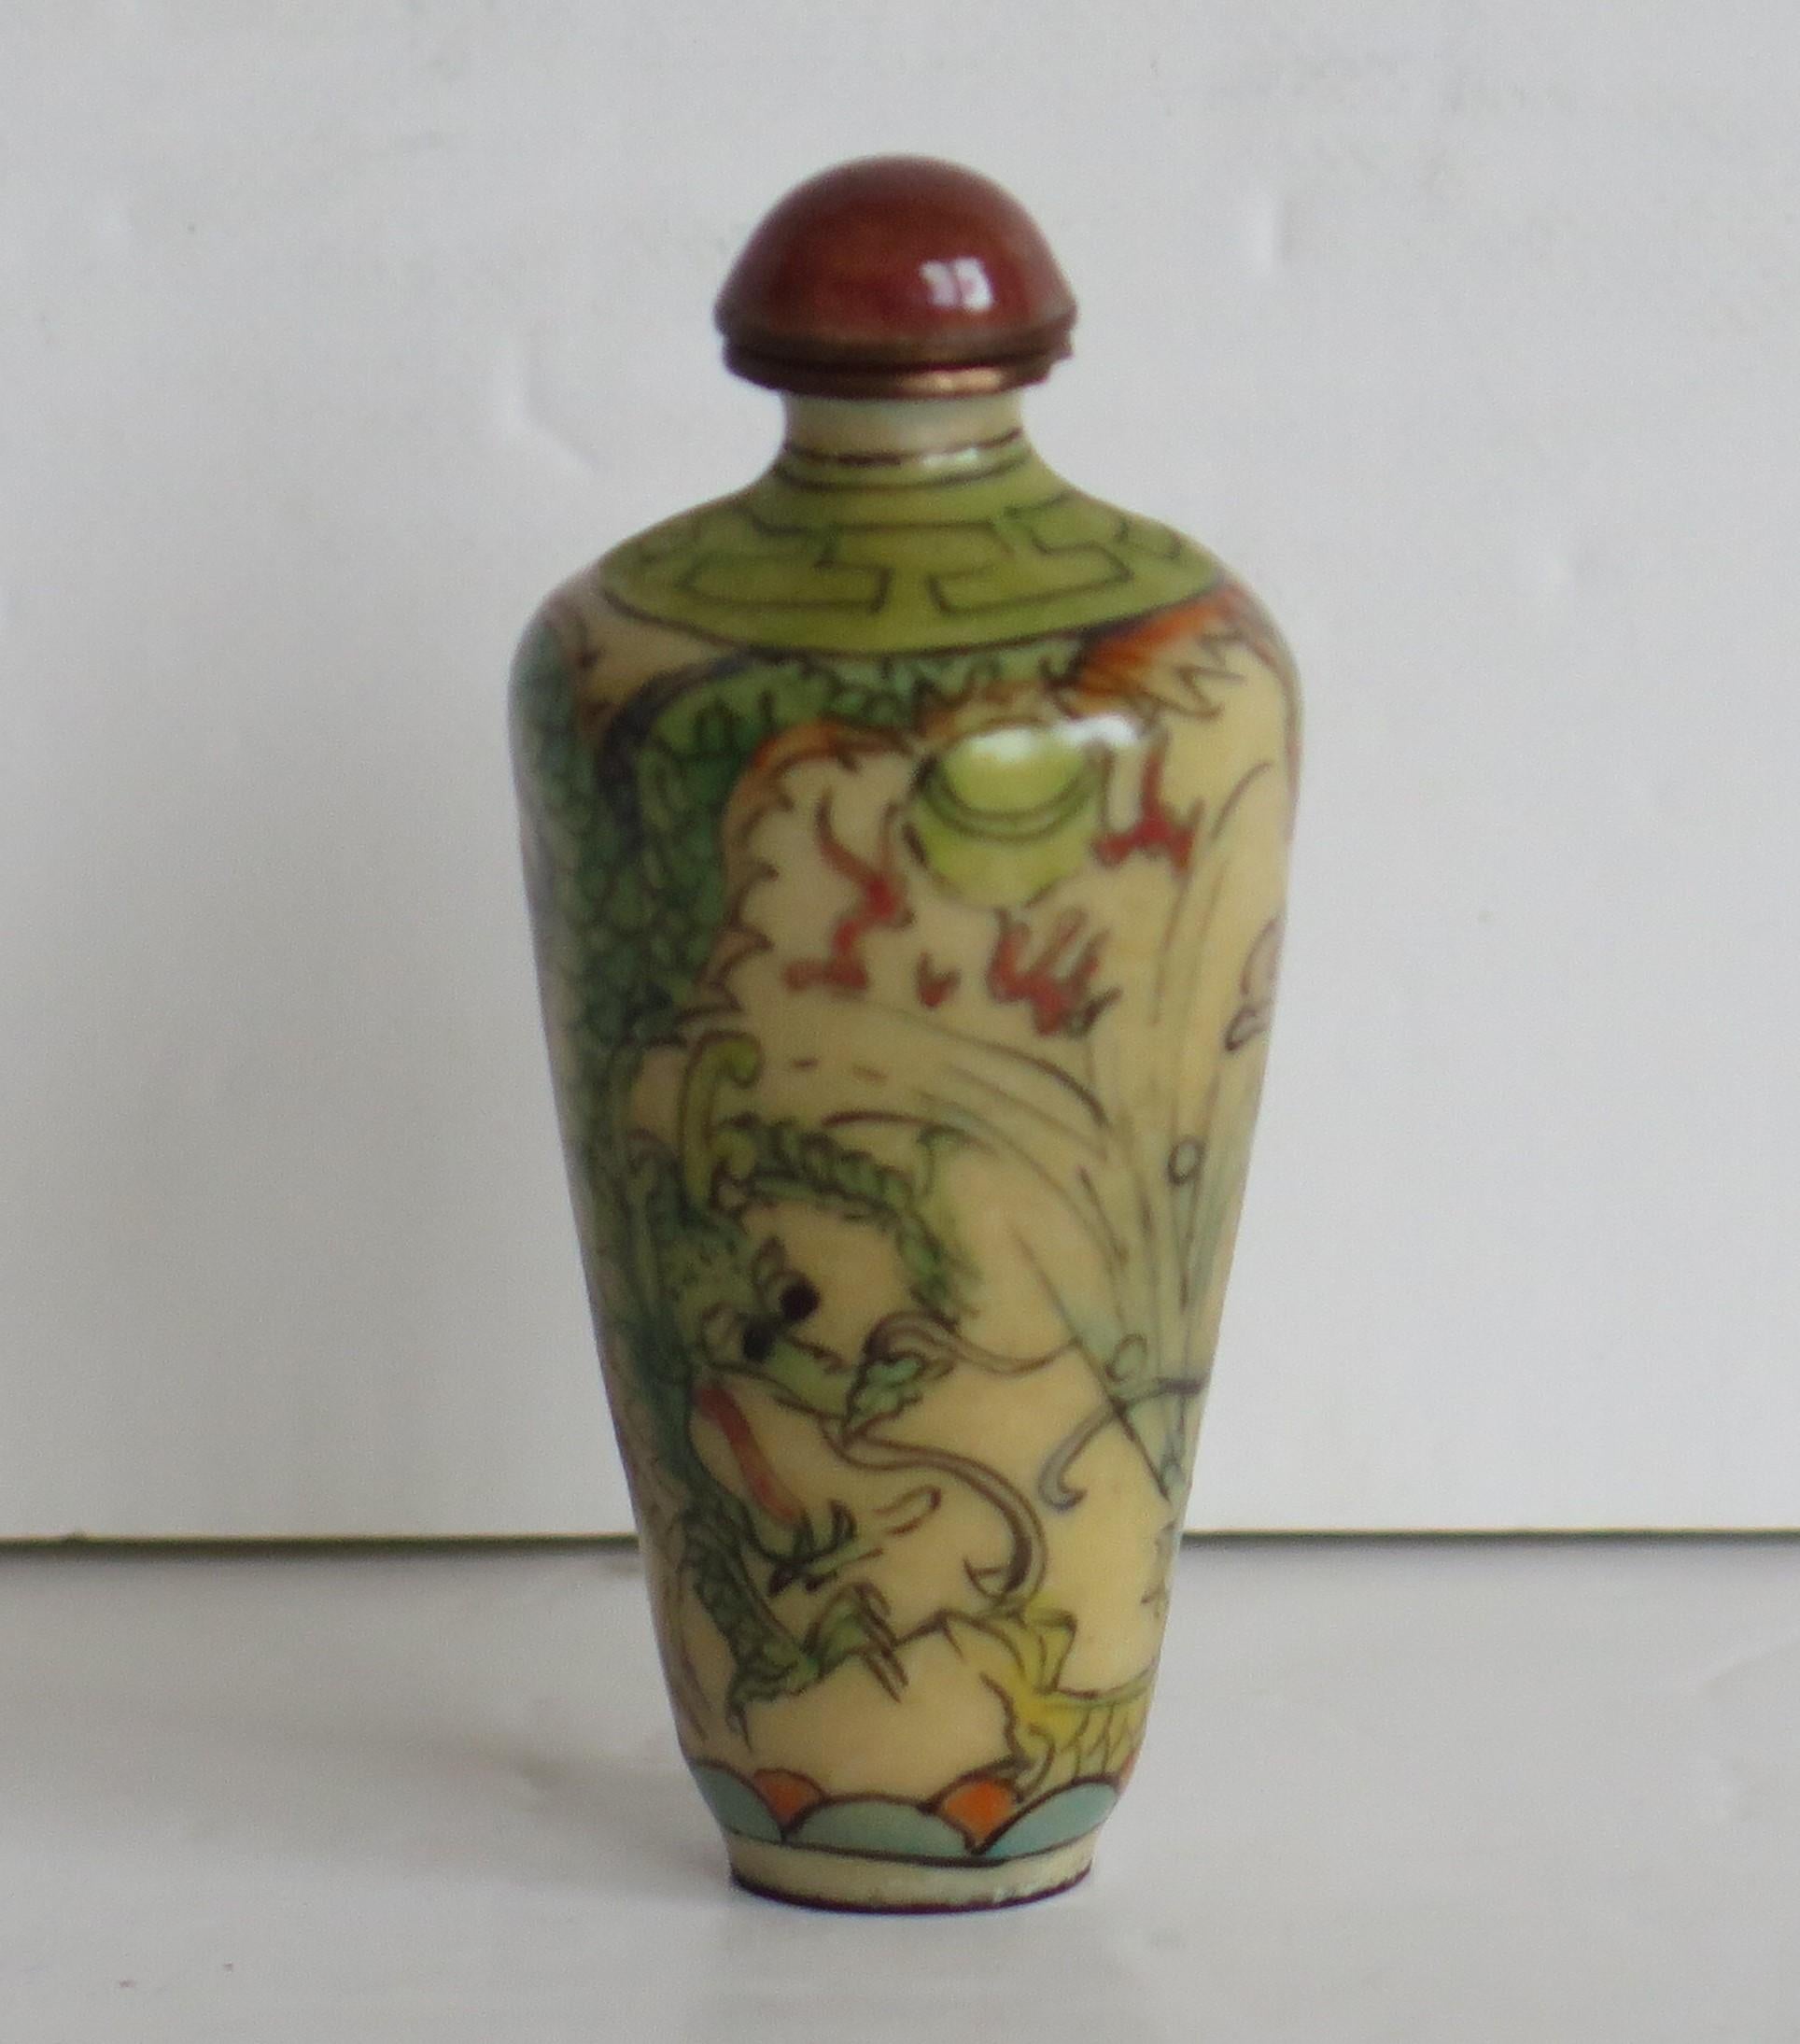 Details about   Chinese Old Marked Enamel Colored Dragon Head Gilt Porcelain Snuff Bottle 